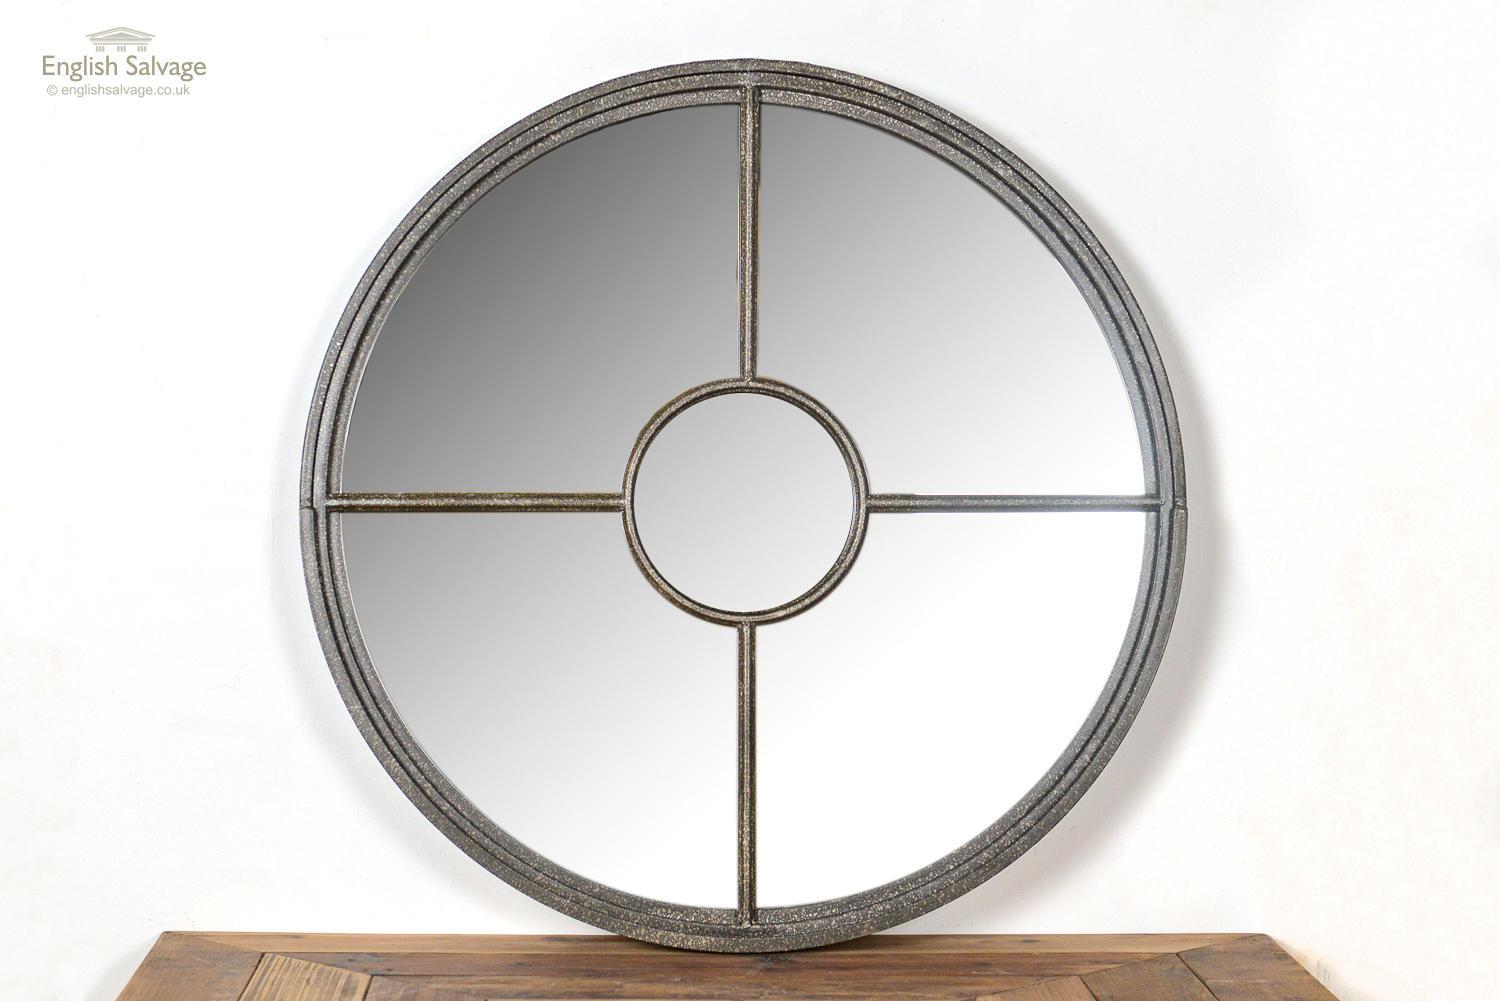 New metal fixed round window mirror. Can be used indoors and outdoors, if outdoors it will weather over time.